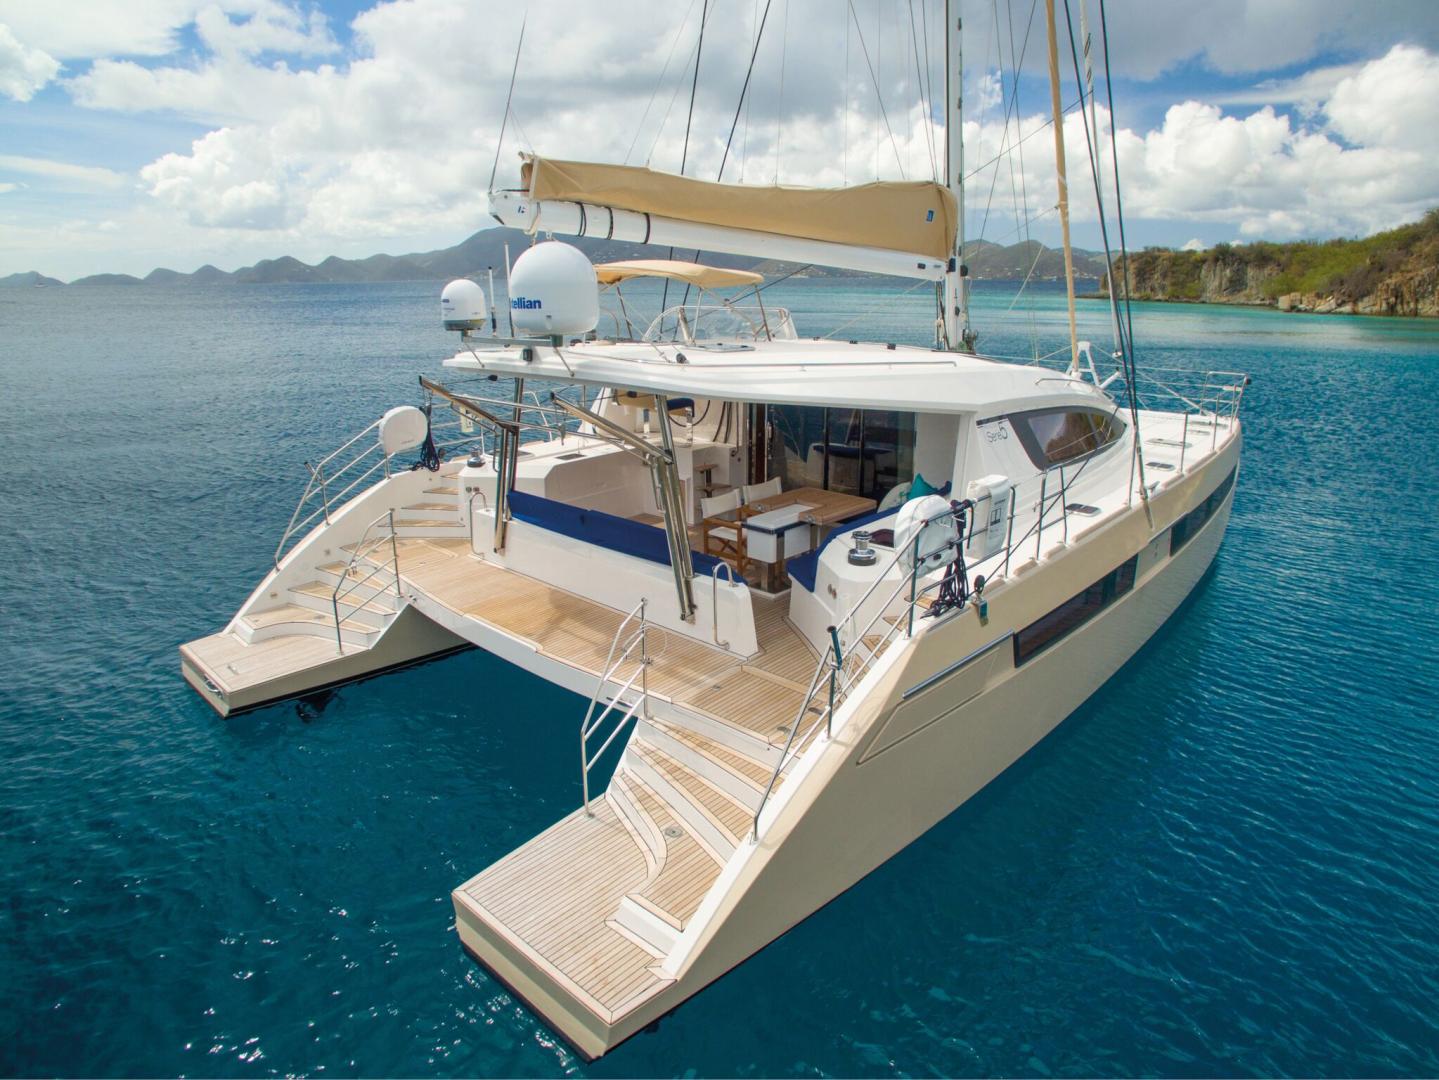 Torqeedo's hybrid and electric propulsion systems for multihull yachts